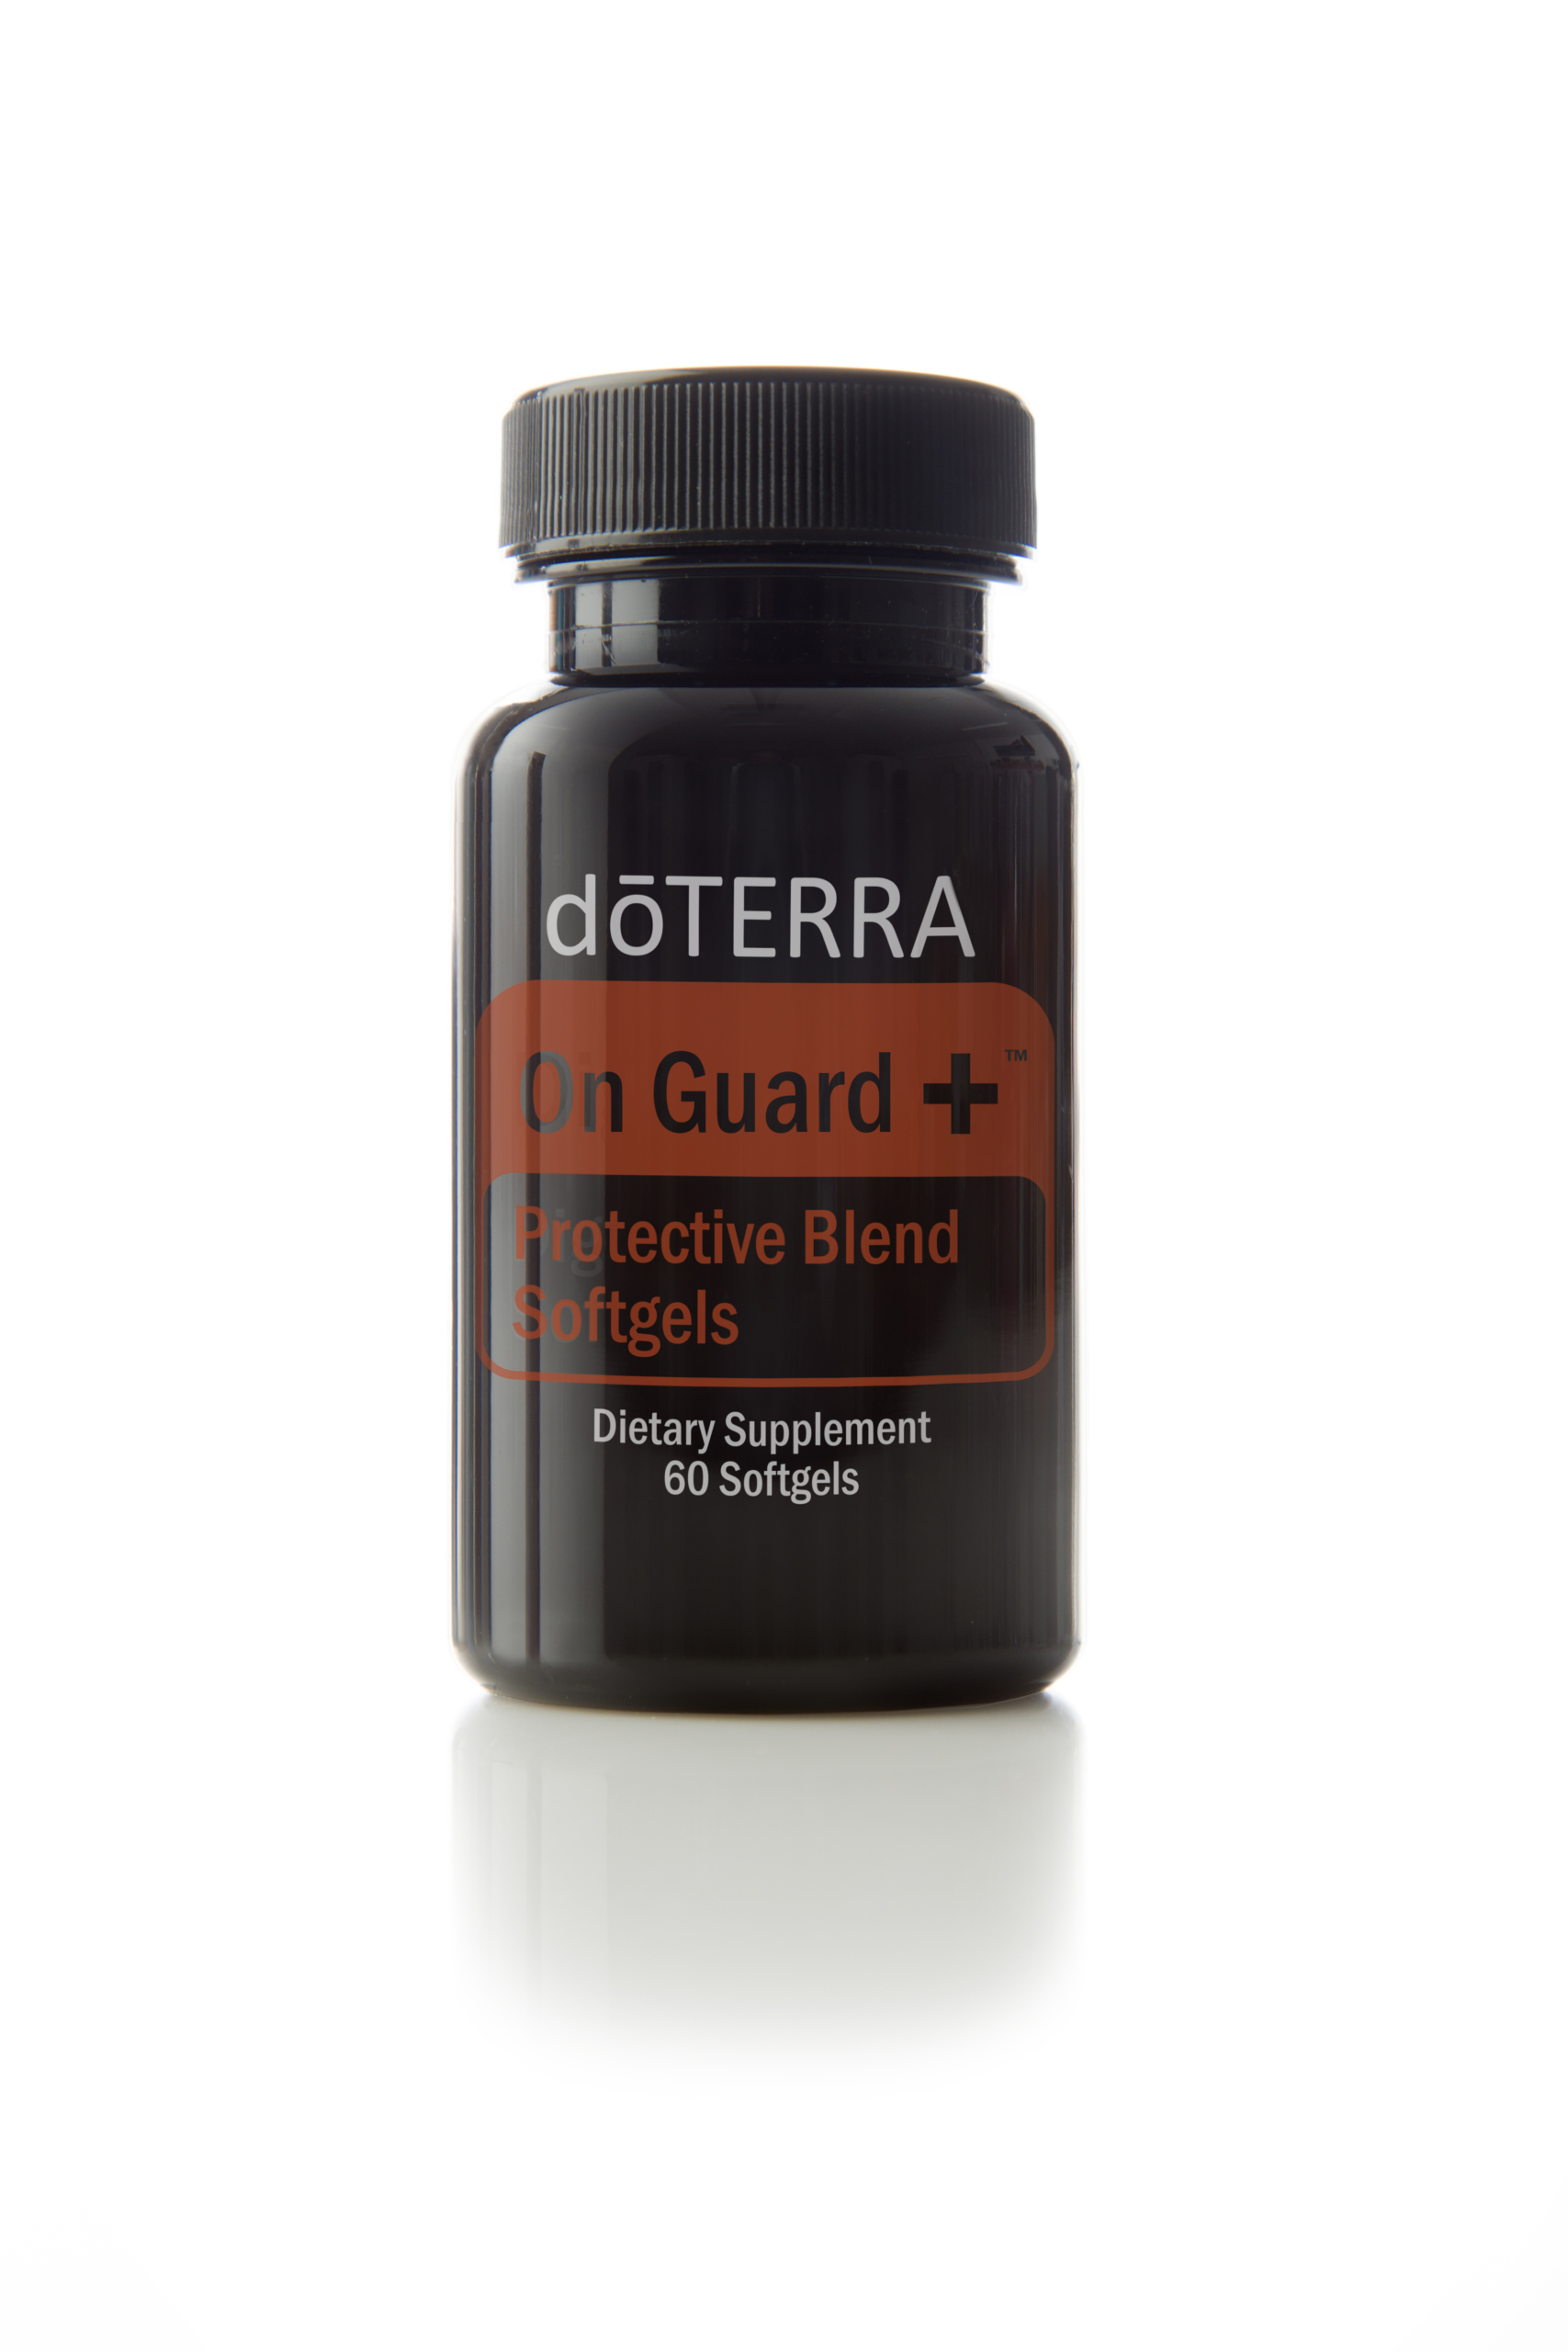 On Guard Protective Blend of soft gels with essential oils